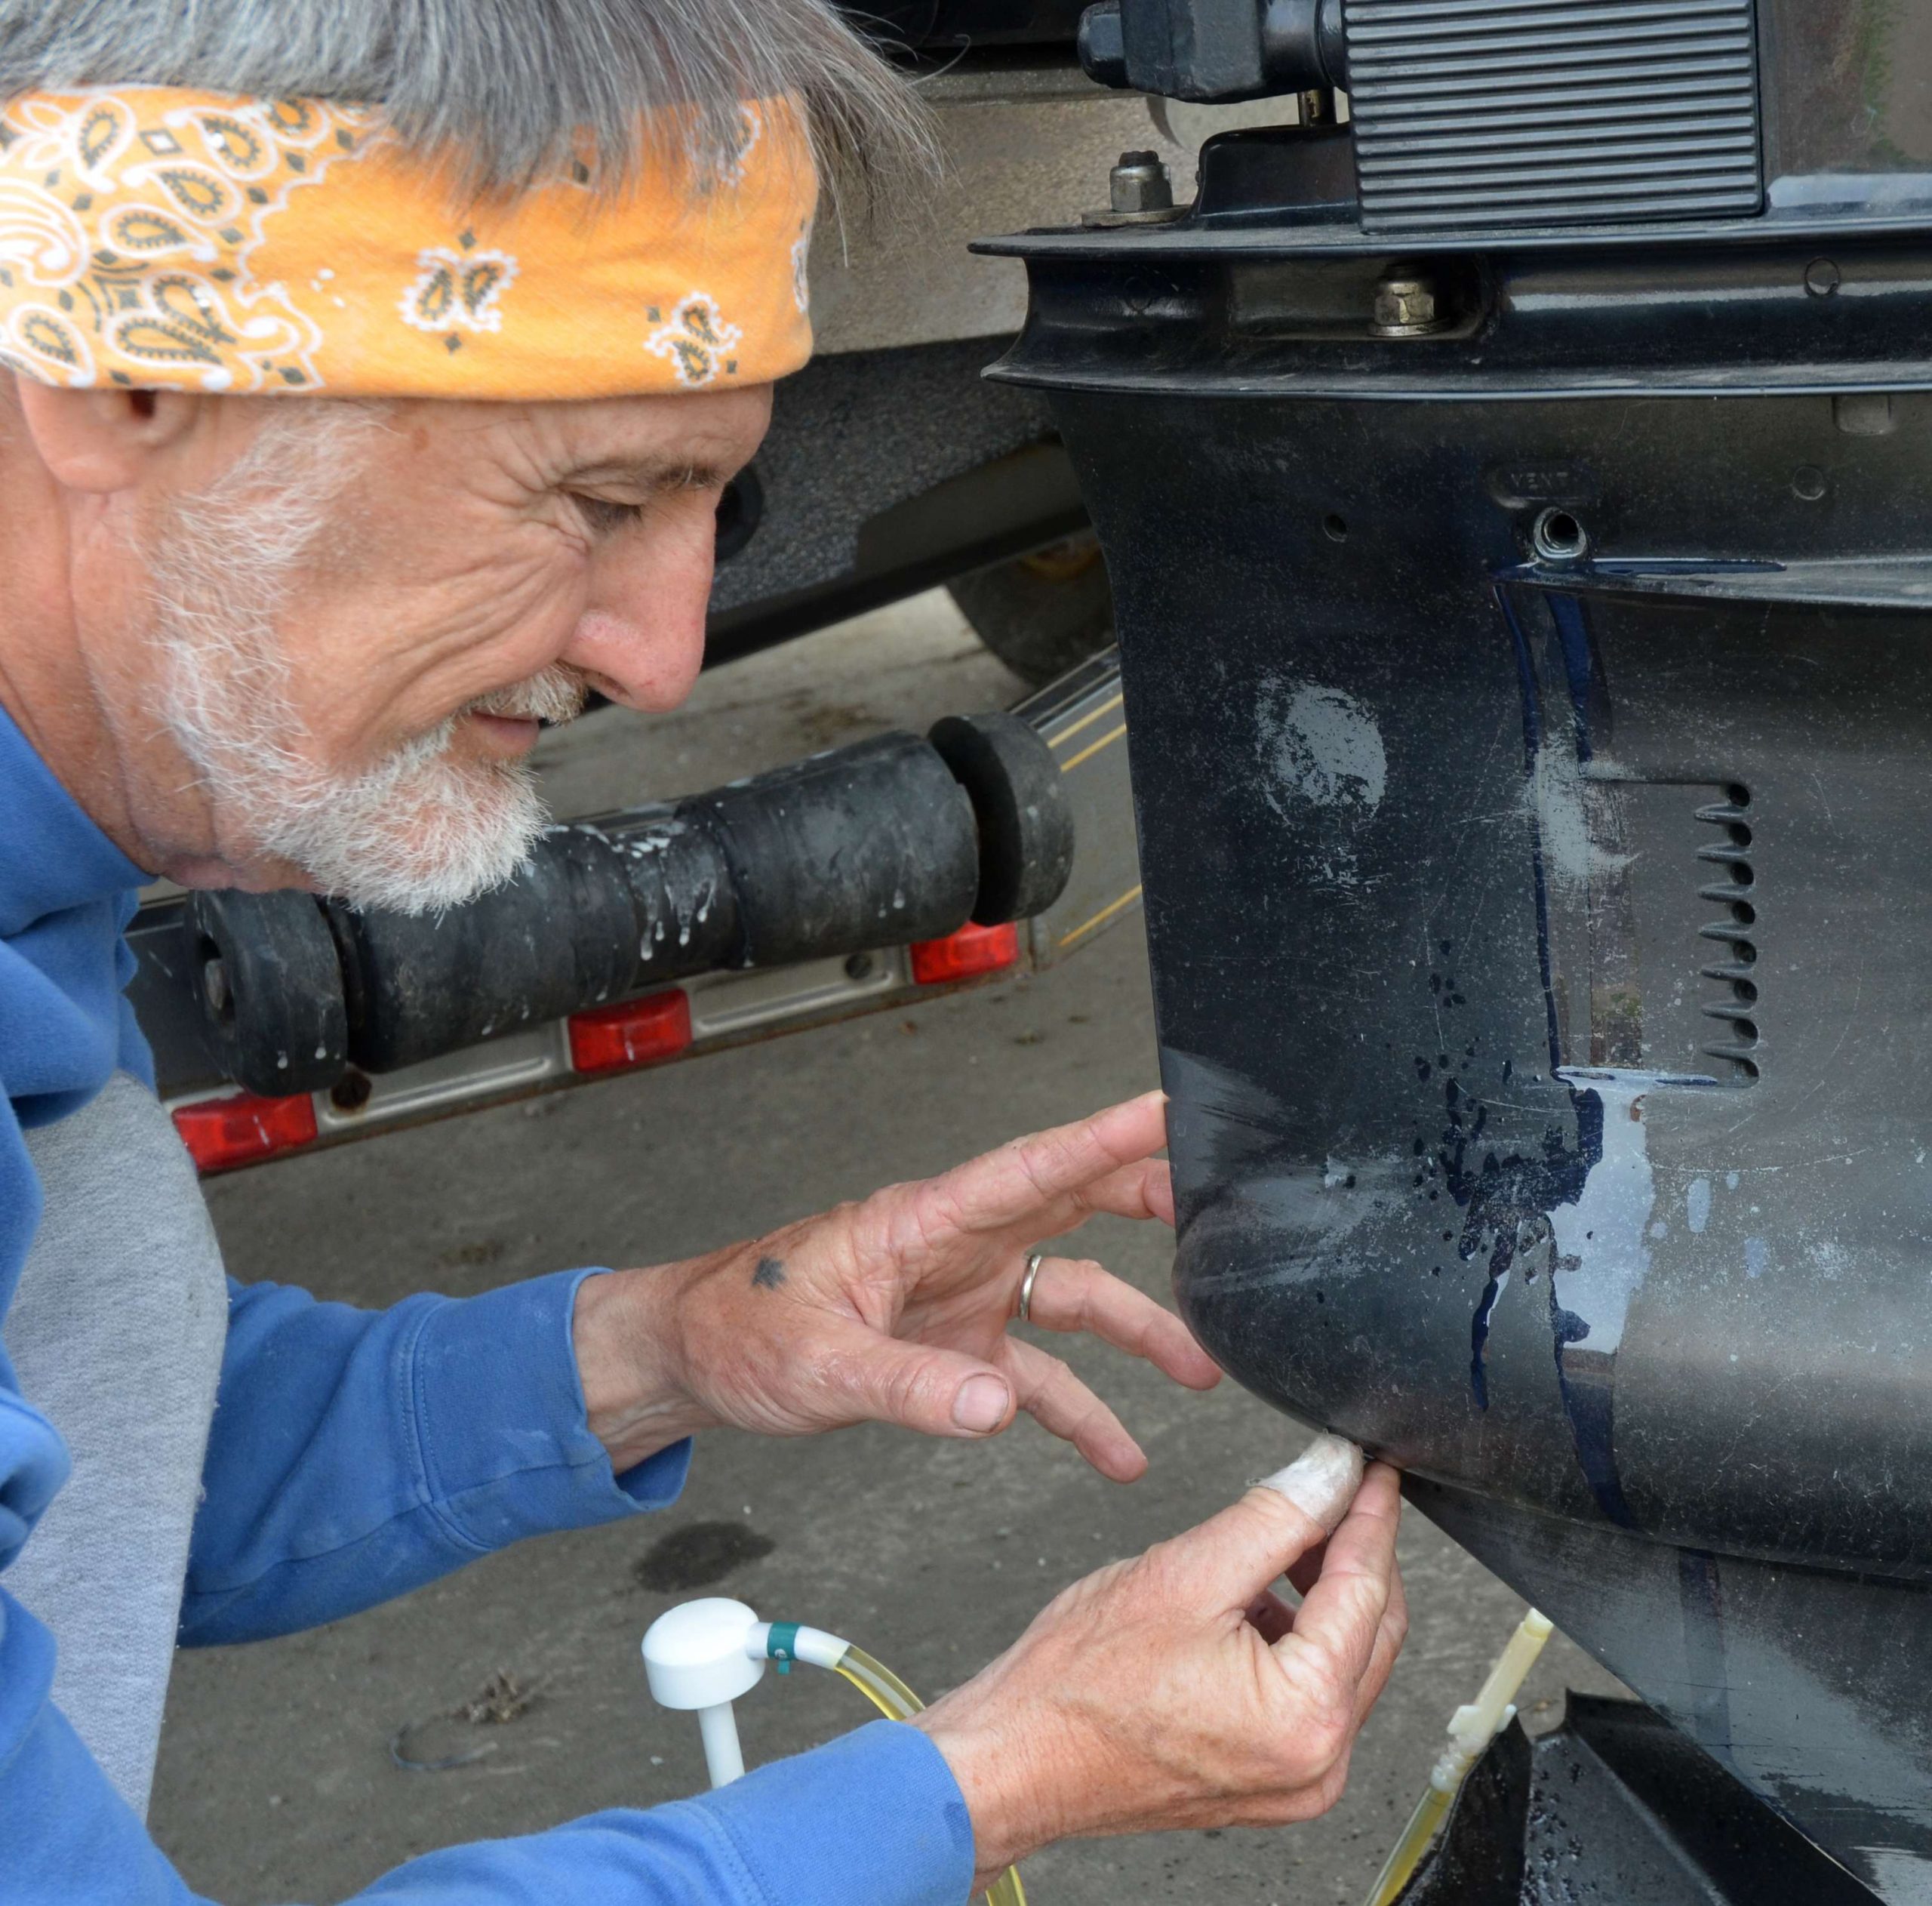 <em>CHANGING GEAR OIL</em>
<br>Stop pumping when oil seeps out of the upper hole. Quickly insert the screw into the bottom of the lower unit to prevent too much oil from draining out.